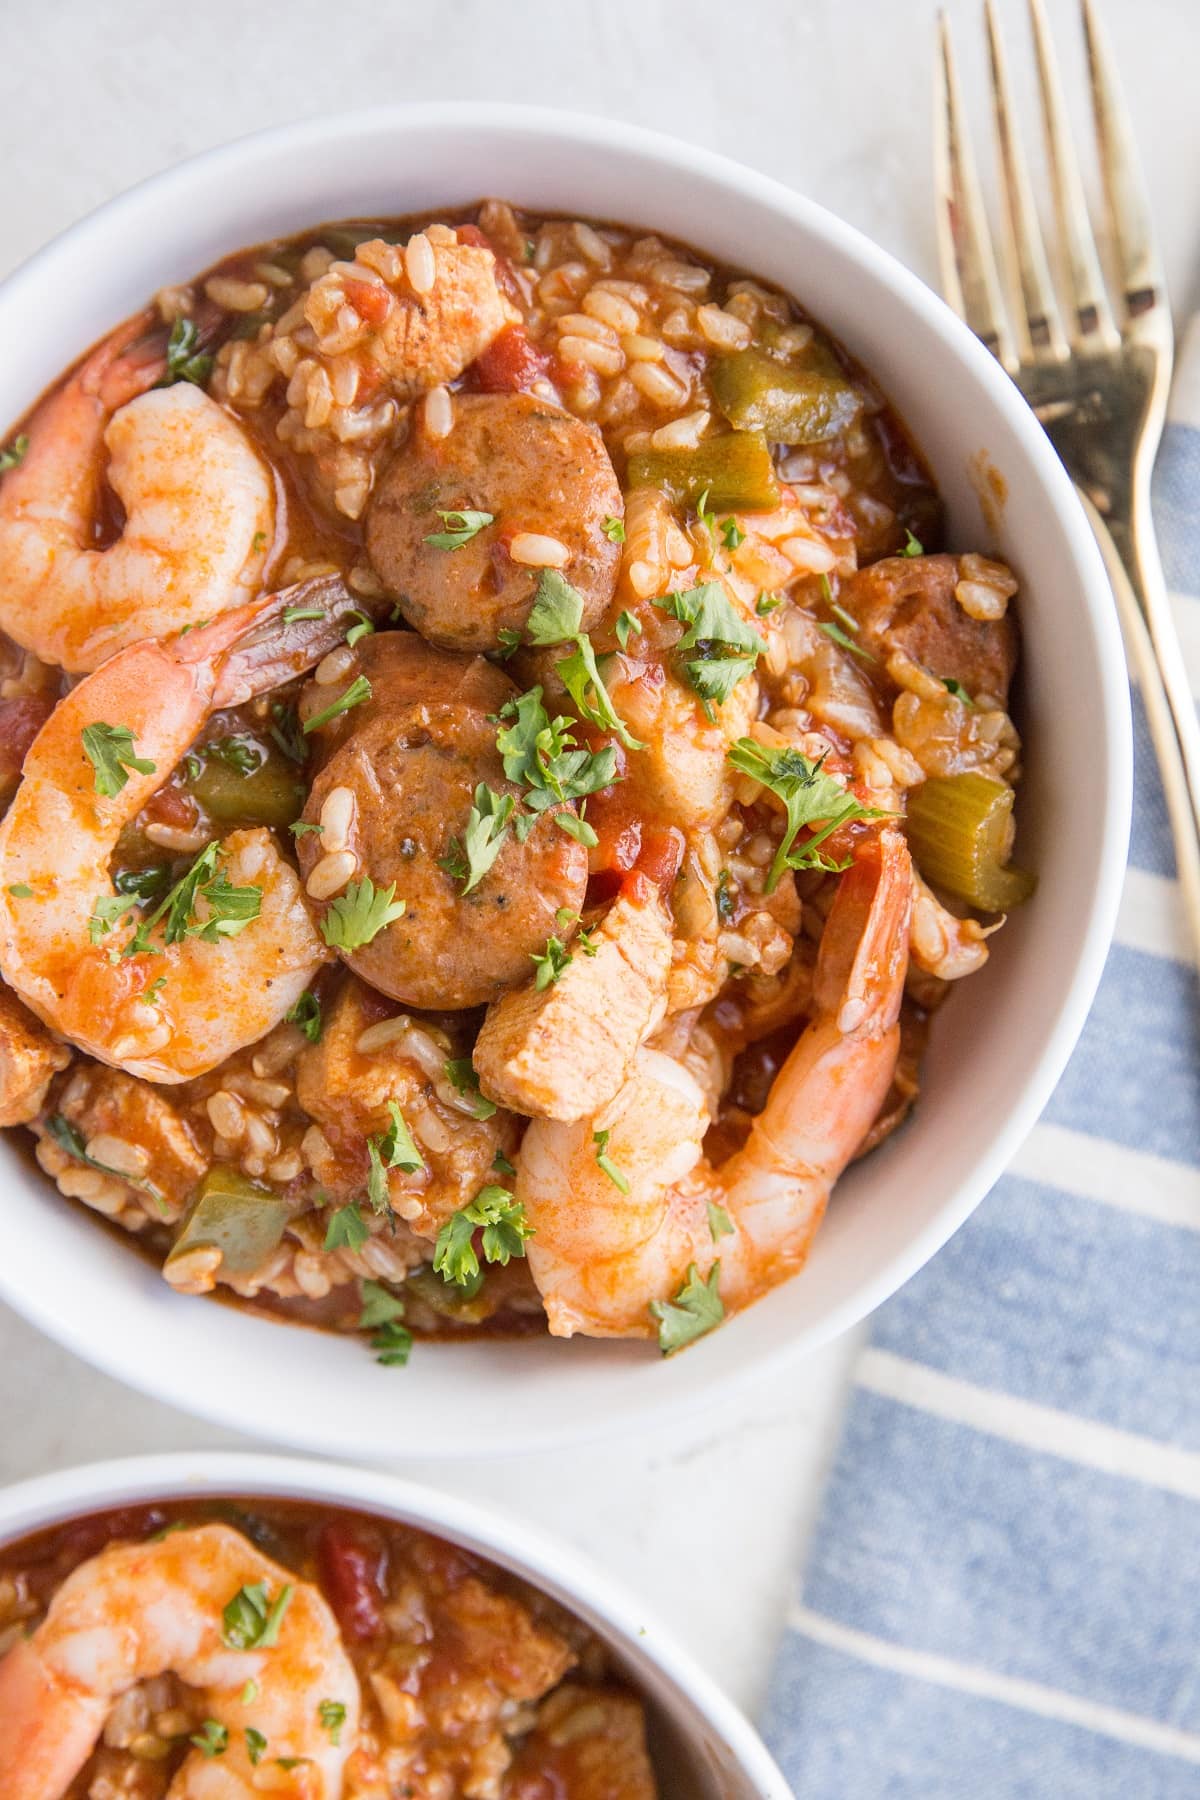 Top down photo of two bowls of jambalaya with a blue striped napkin to the side